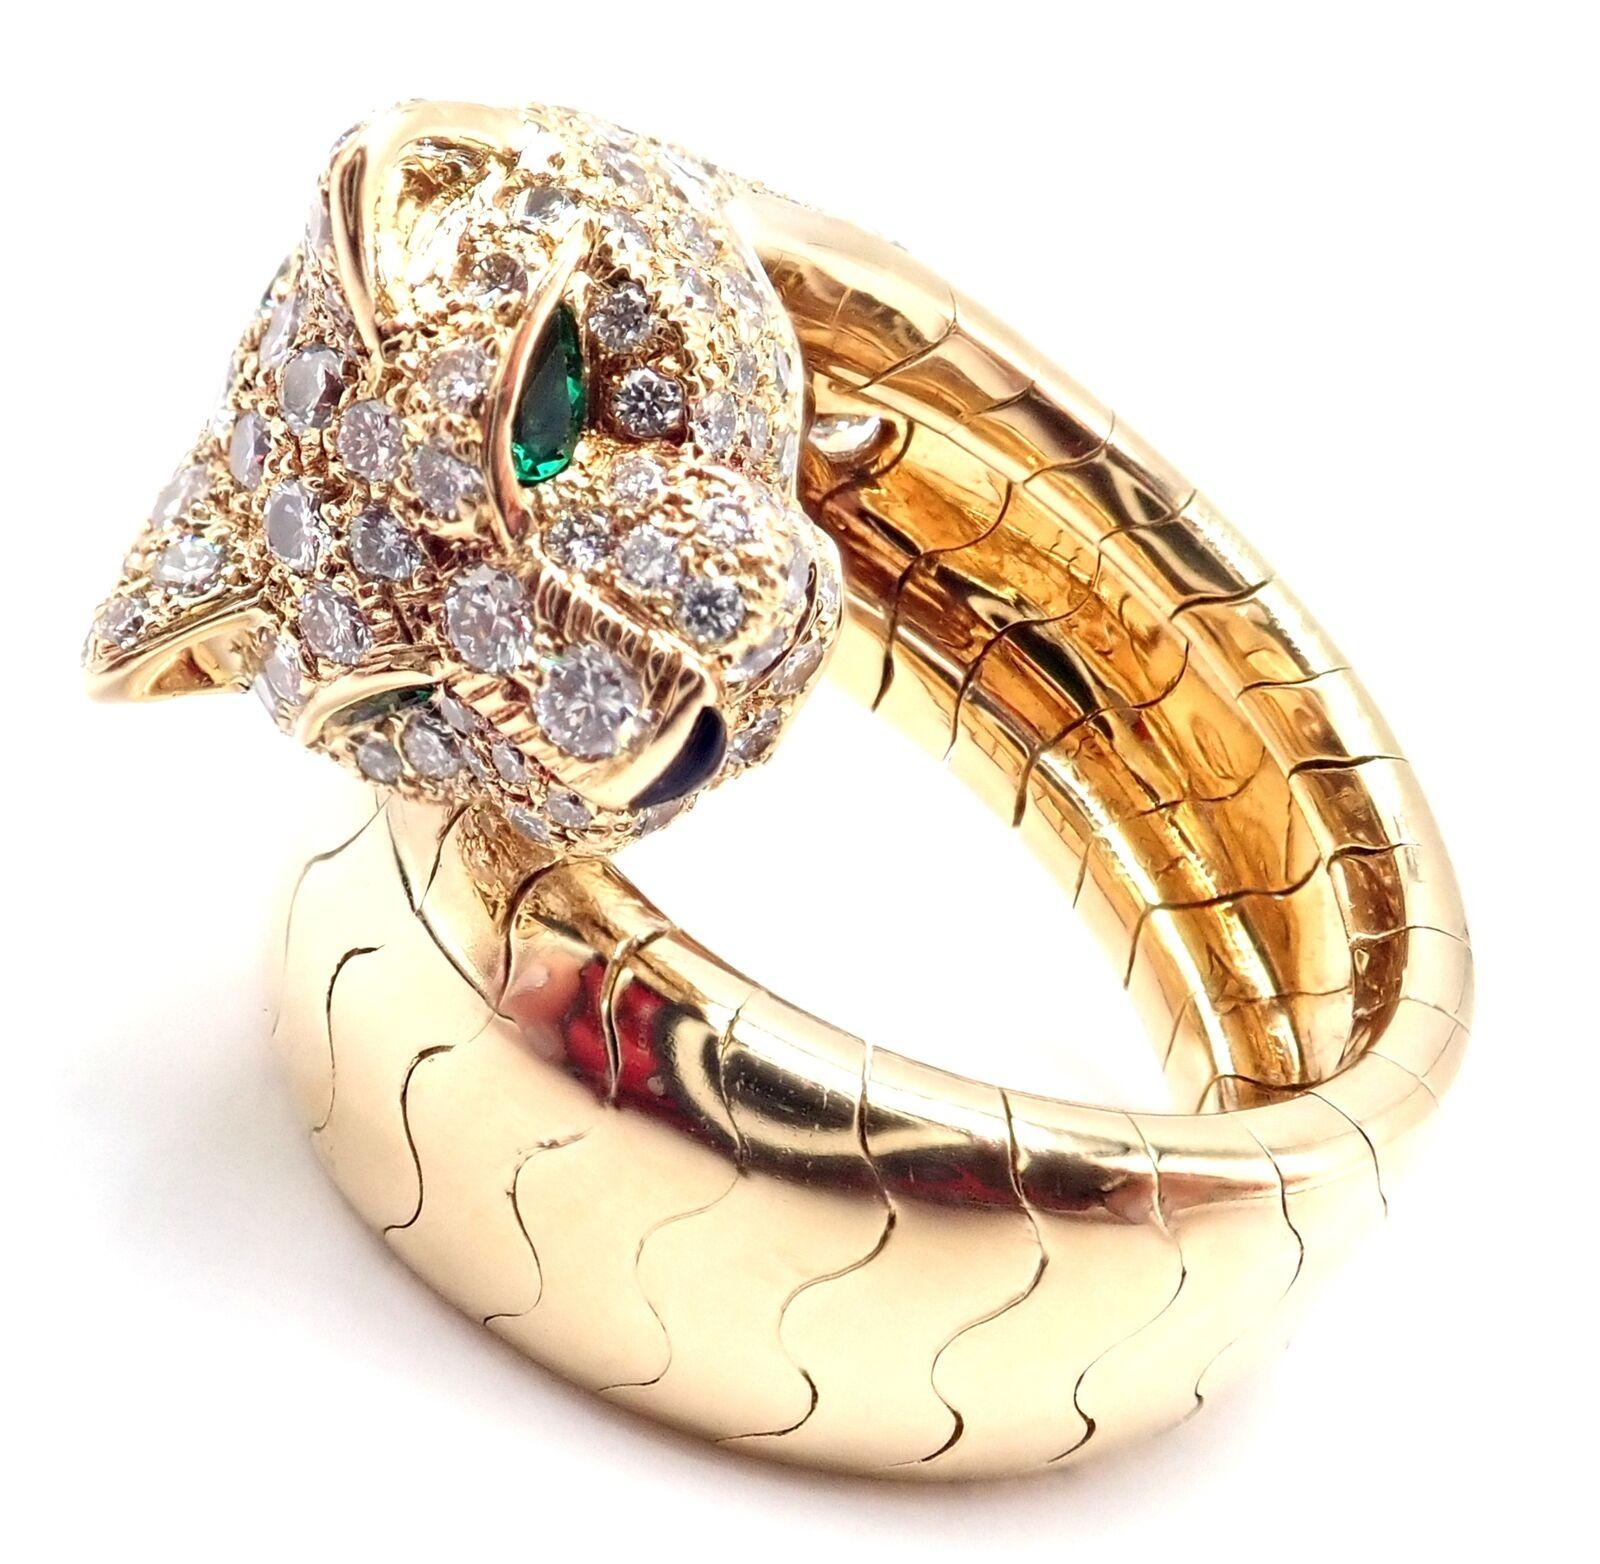 18k Yellow Gold Diamond, Emerald, Onyx Panther Ring by Cartier. 
Part of Cartier's 